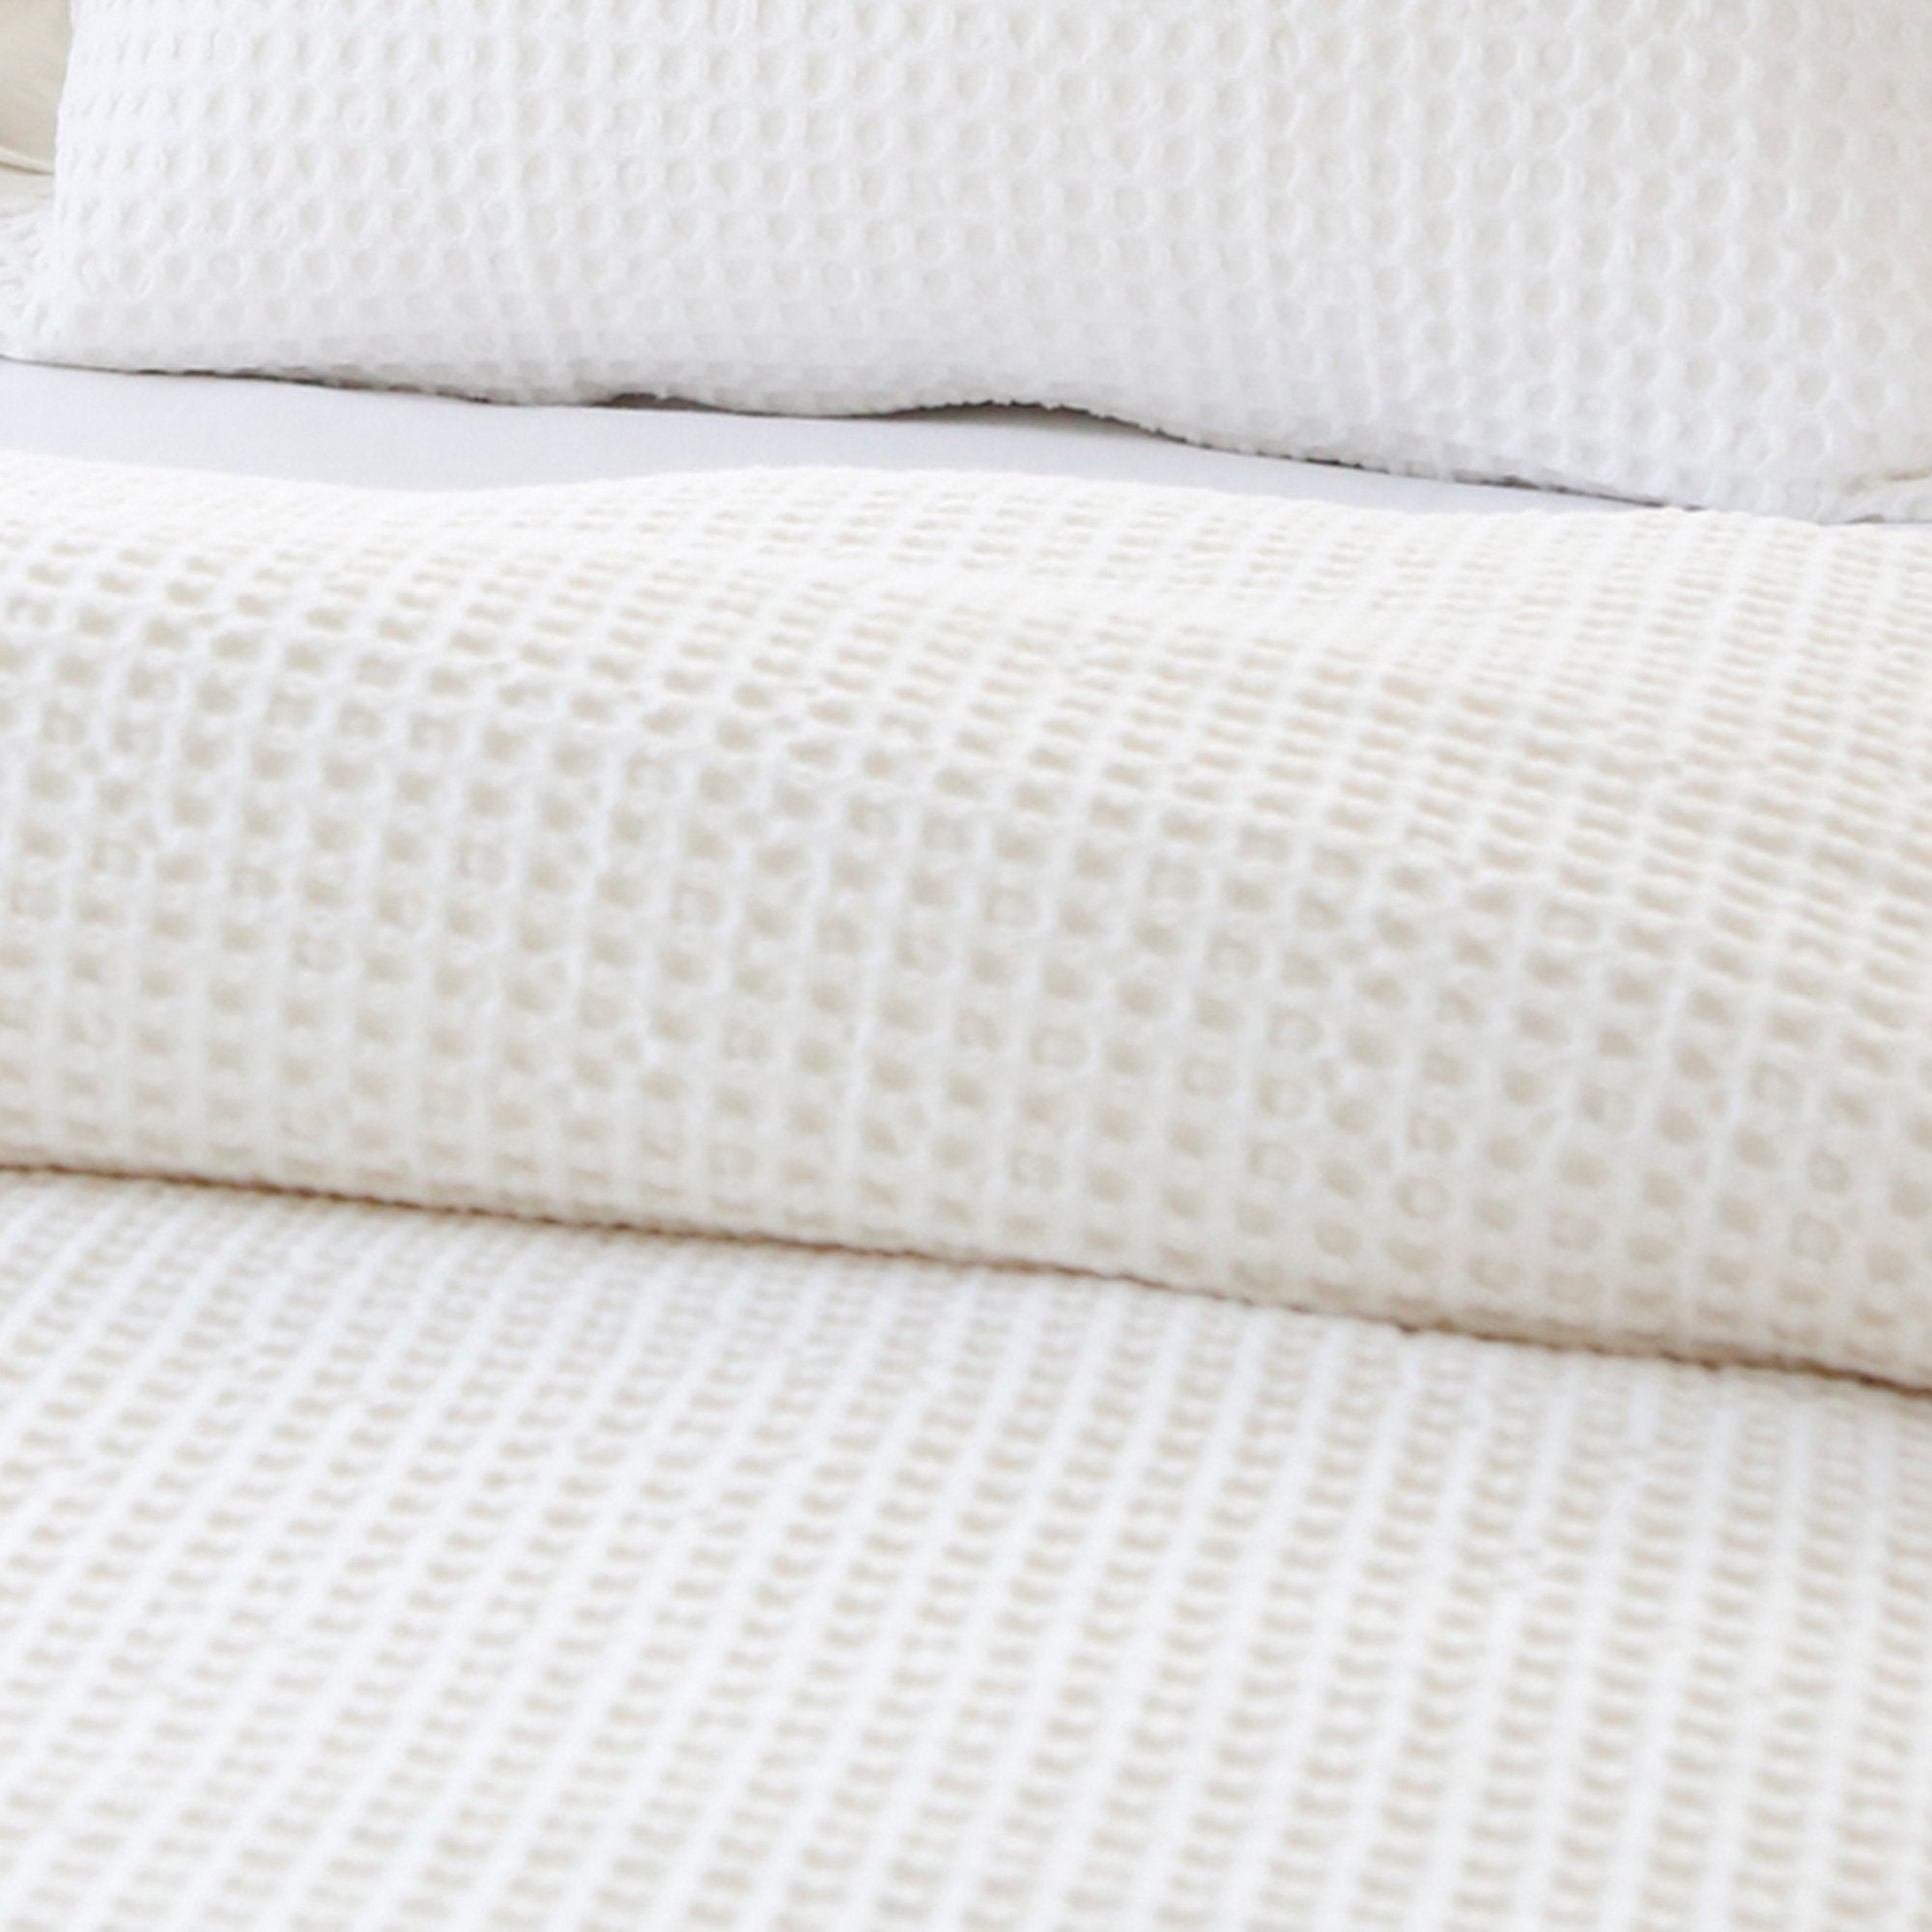 Cream waffle weave blanket - Zuma Cream by Pom Pom at Home - Fig Linens and Home